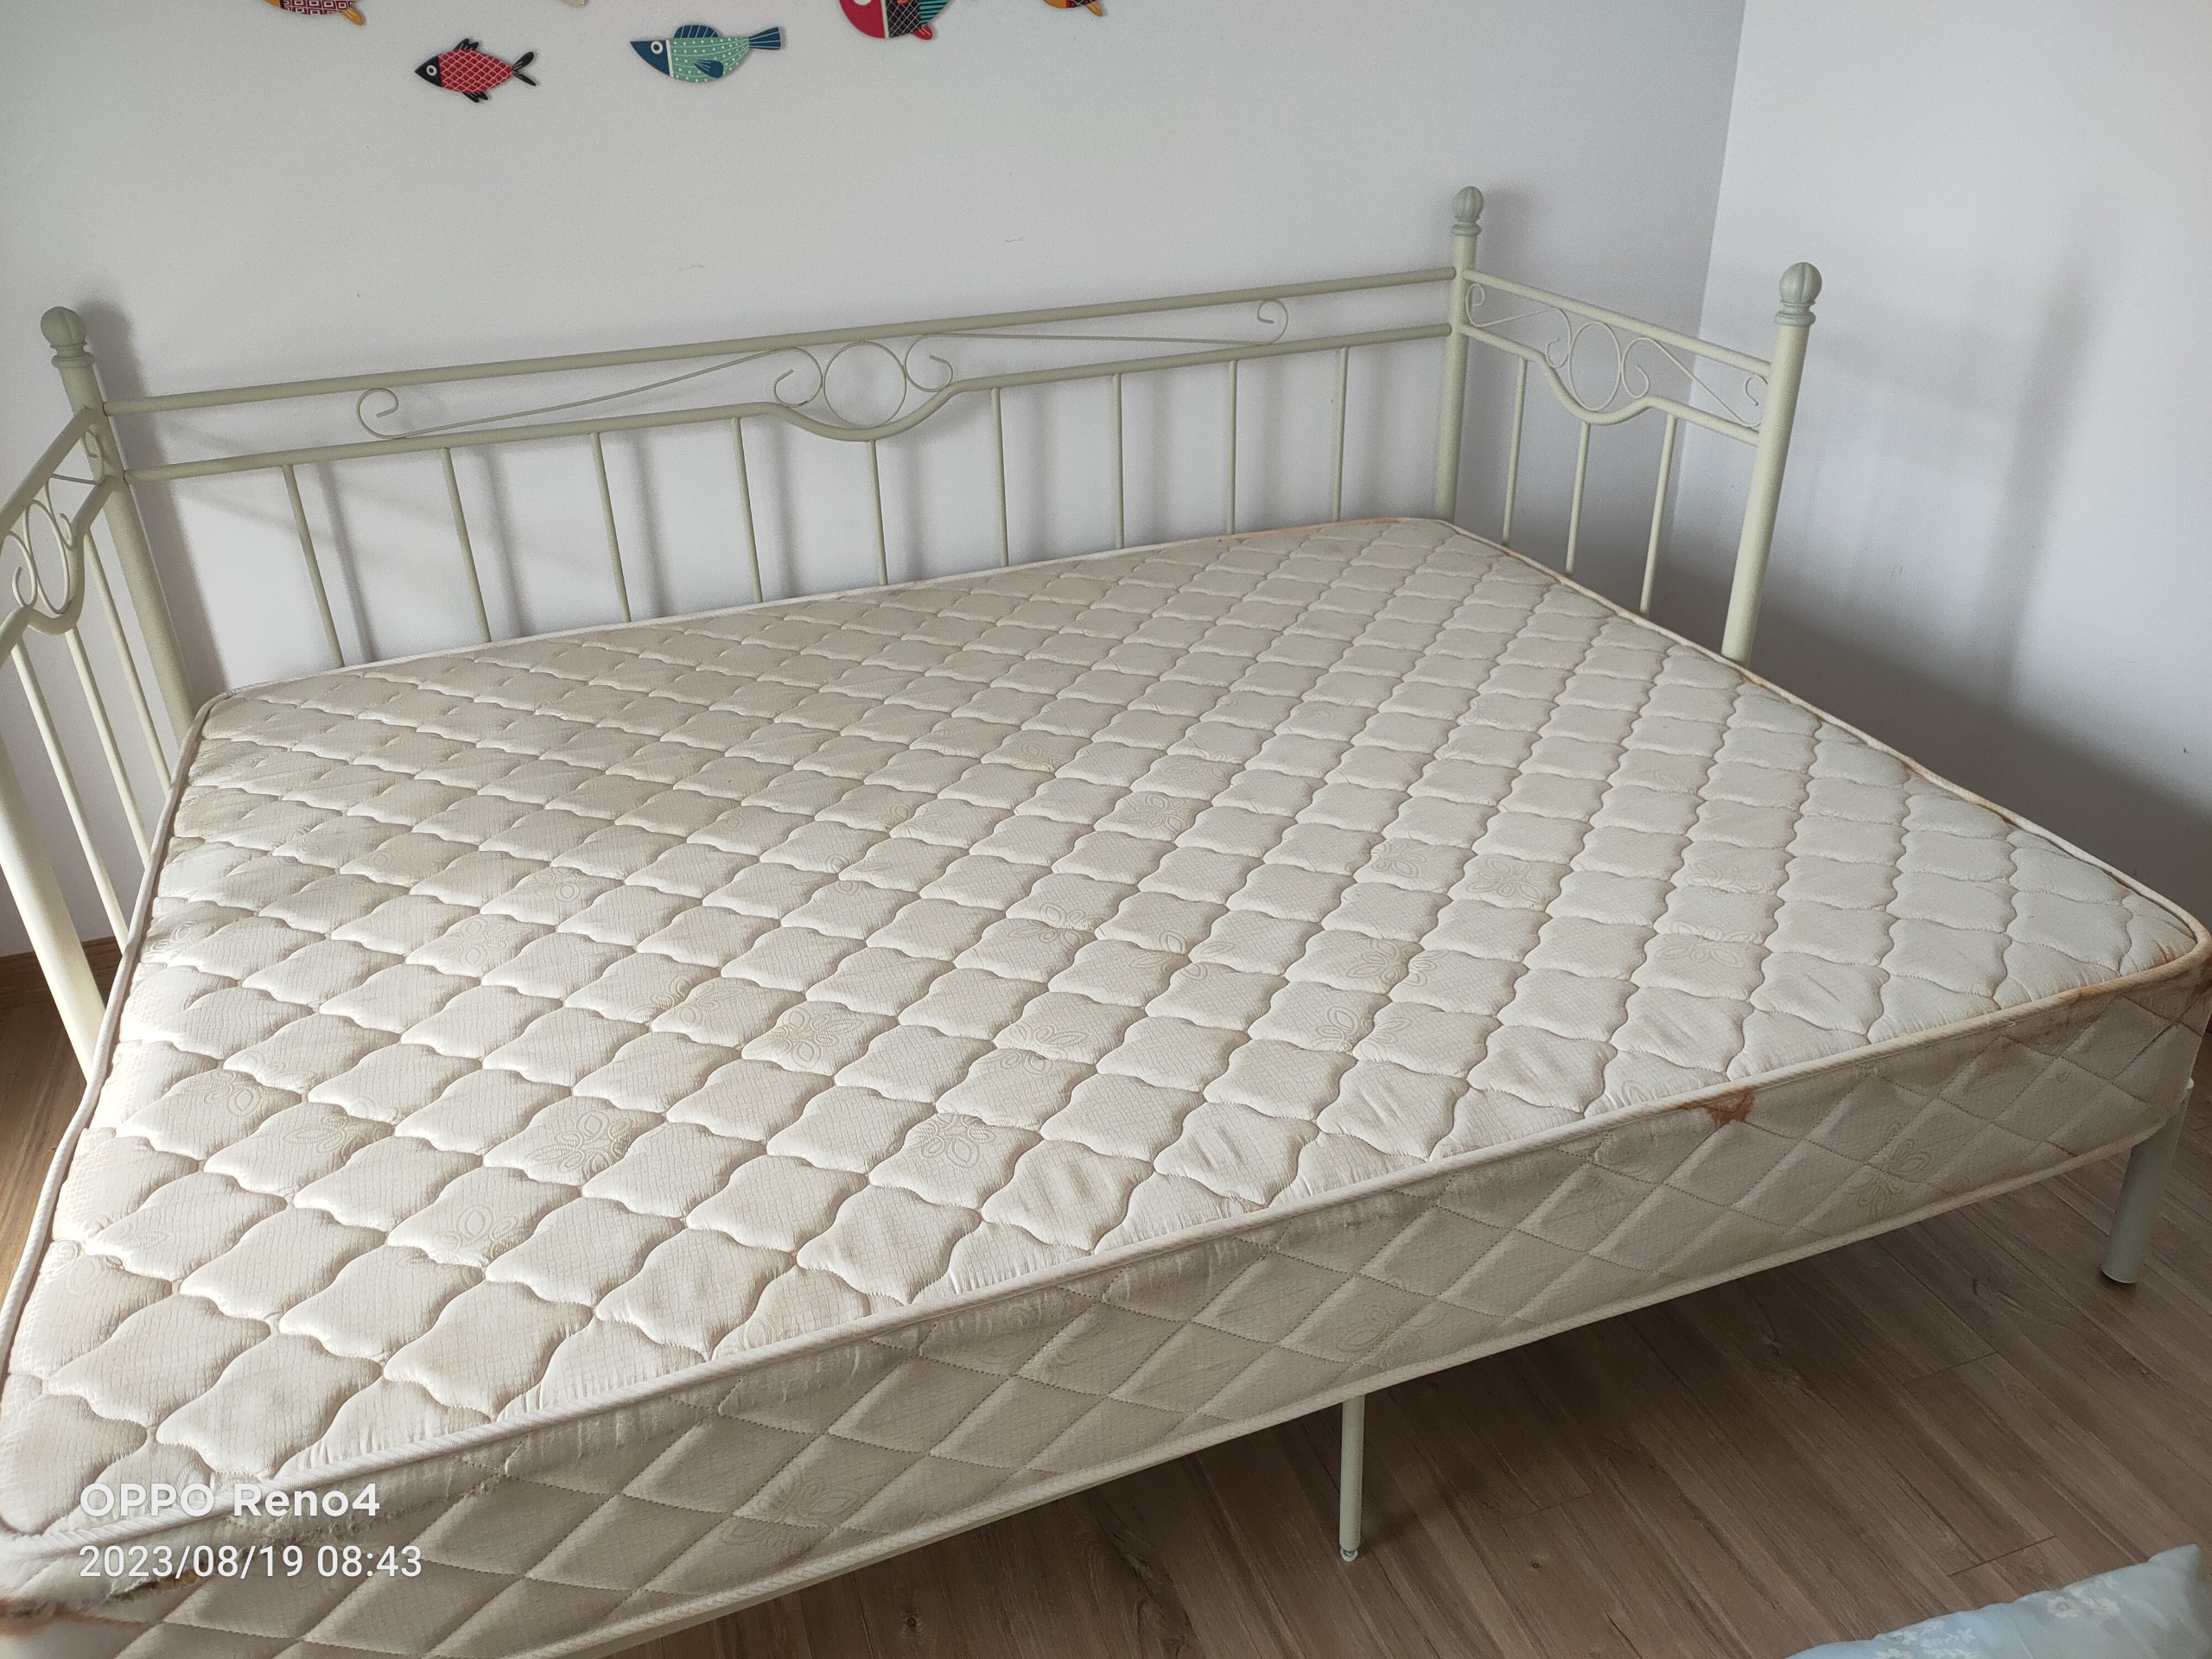 Mattress steam cleaning - mold and stain removal